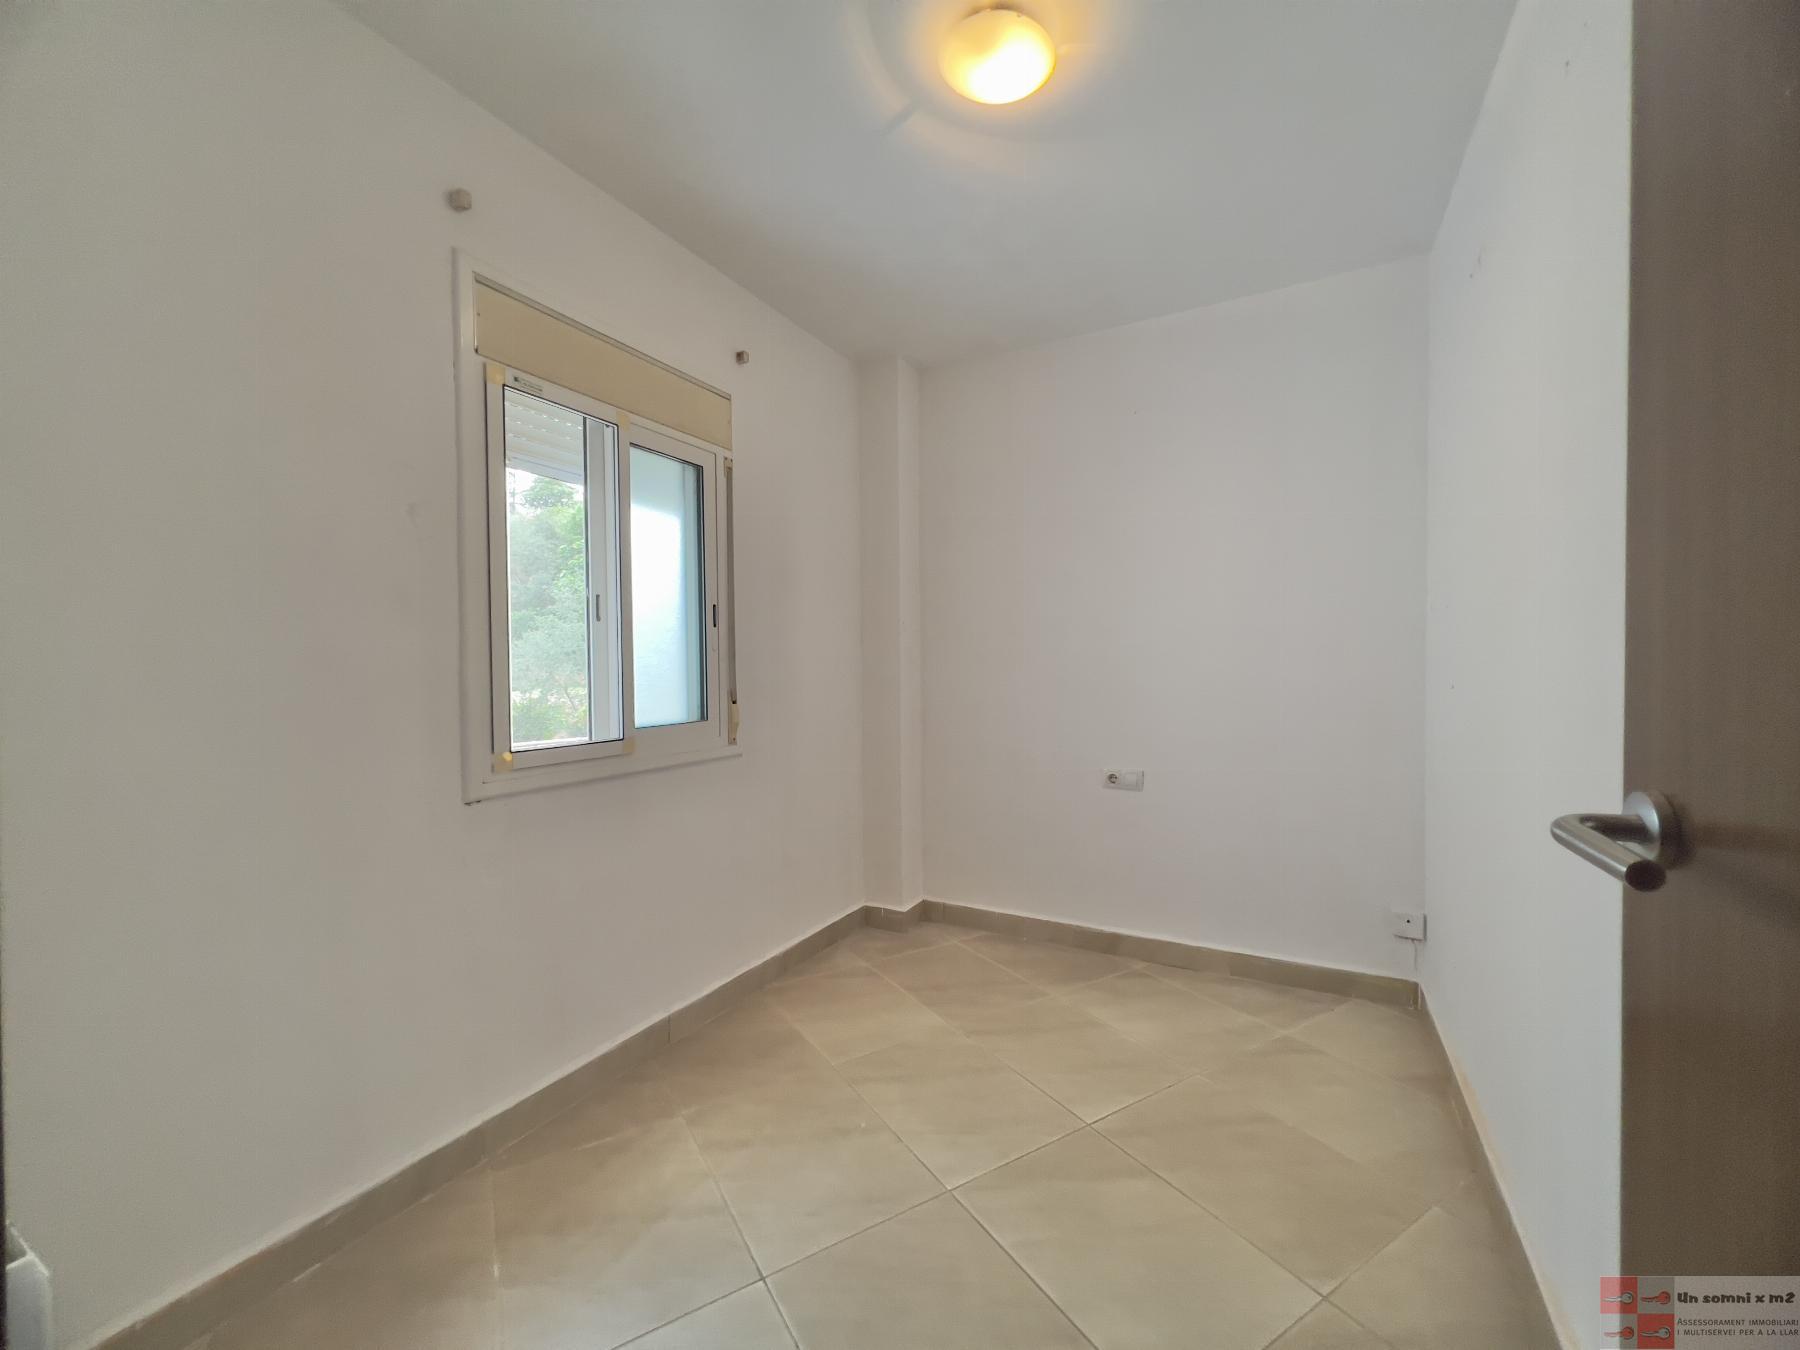 For sale of flat in Piera